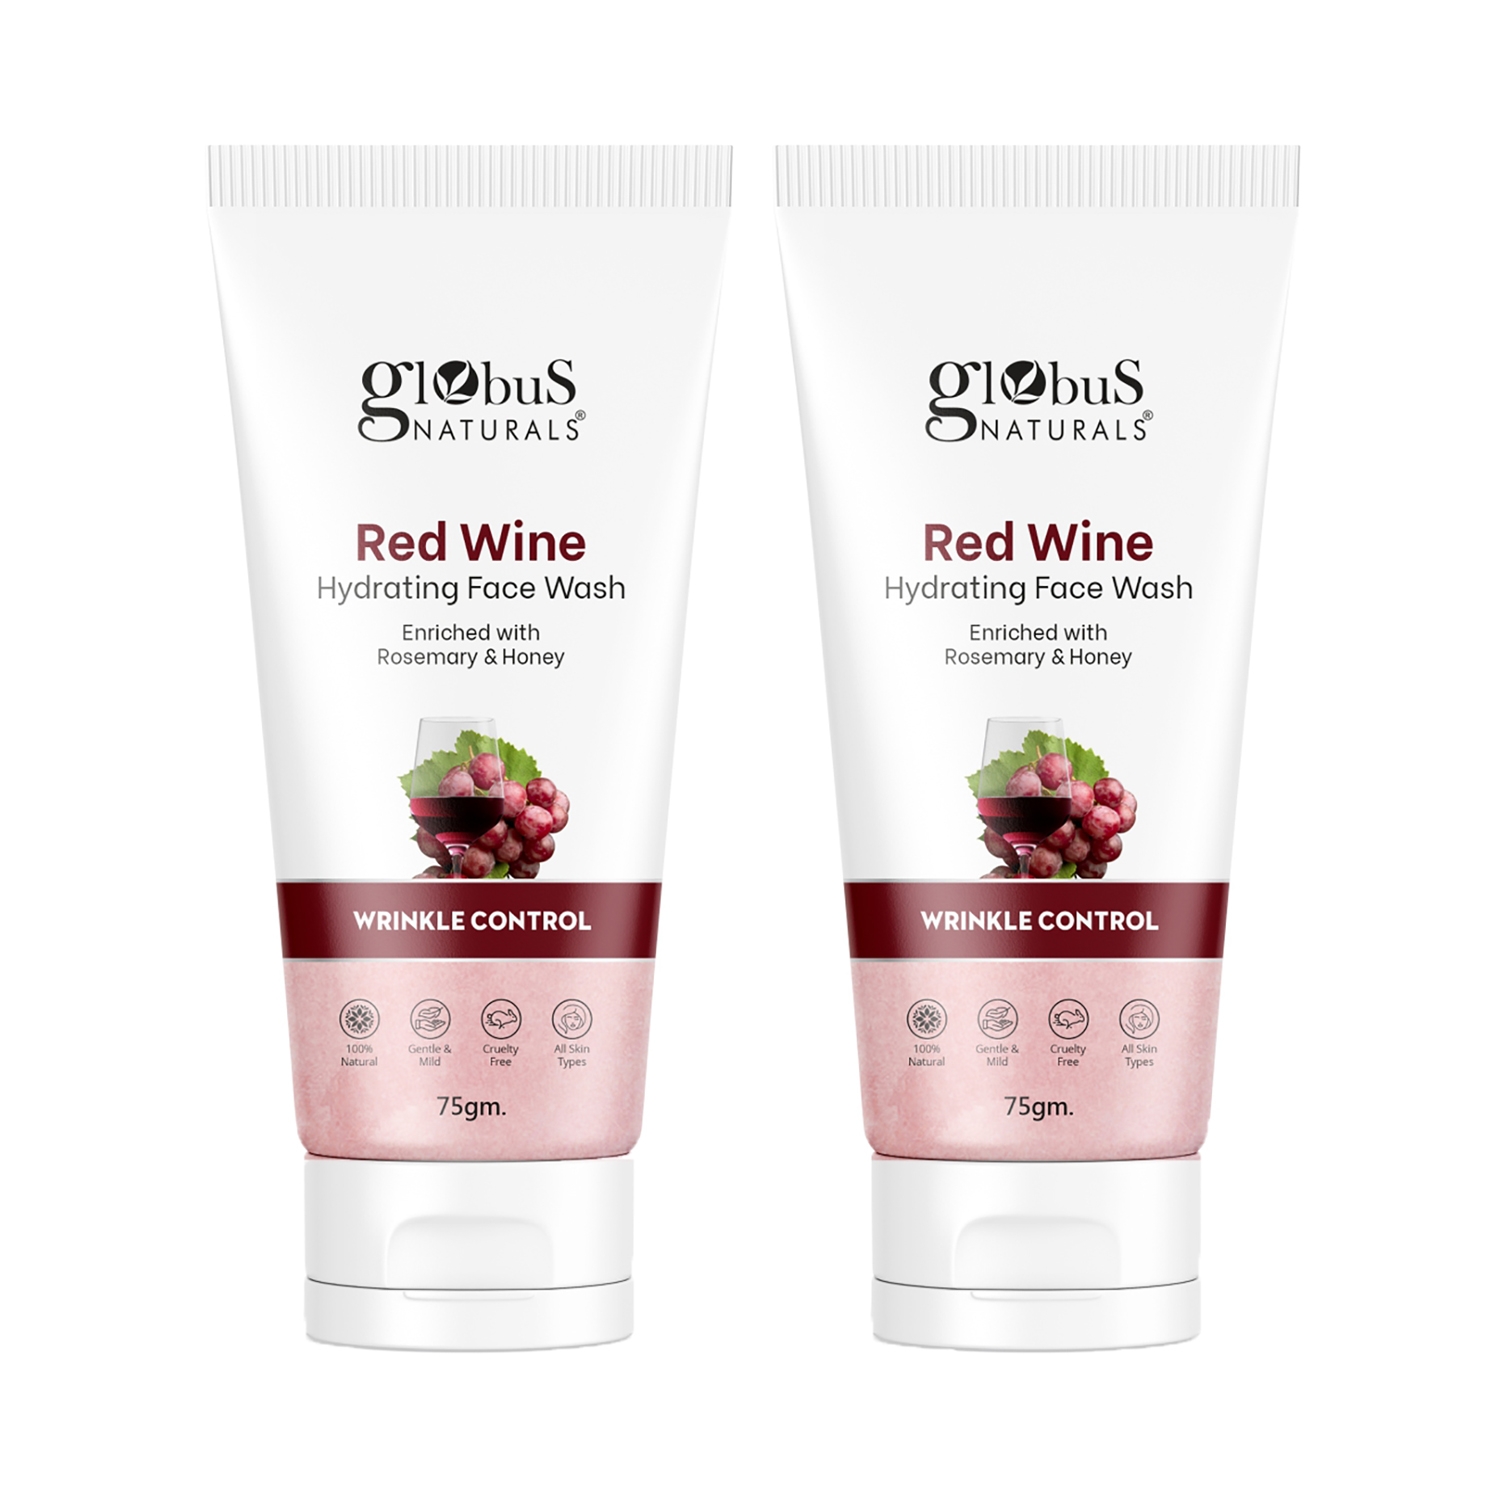 Globus Naturals | Globus Naturals Red Wine Hydrating Face Wash Enriched With Rosemary & Honey For Wrinkle Control (2pc)